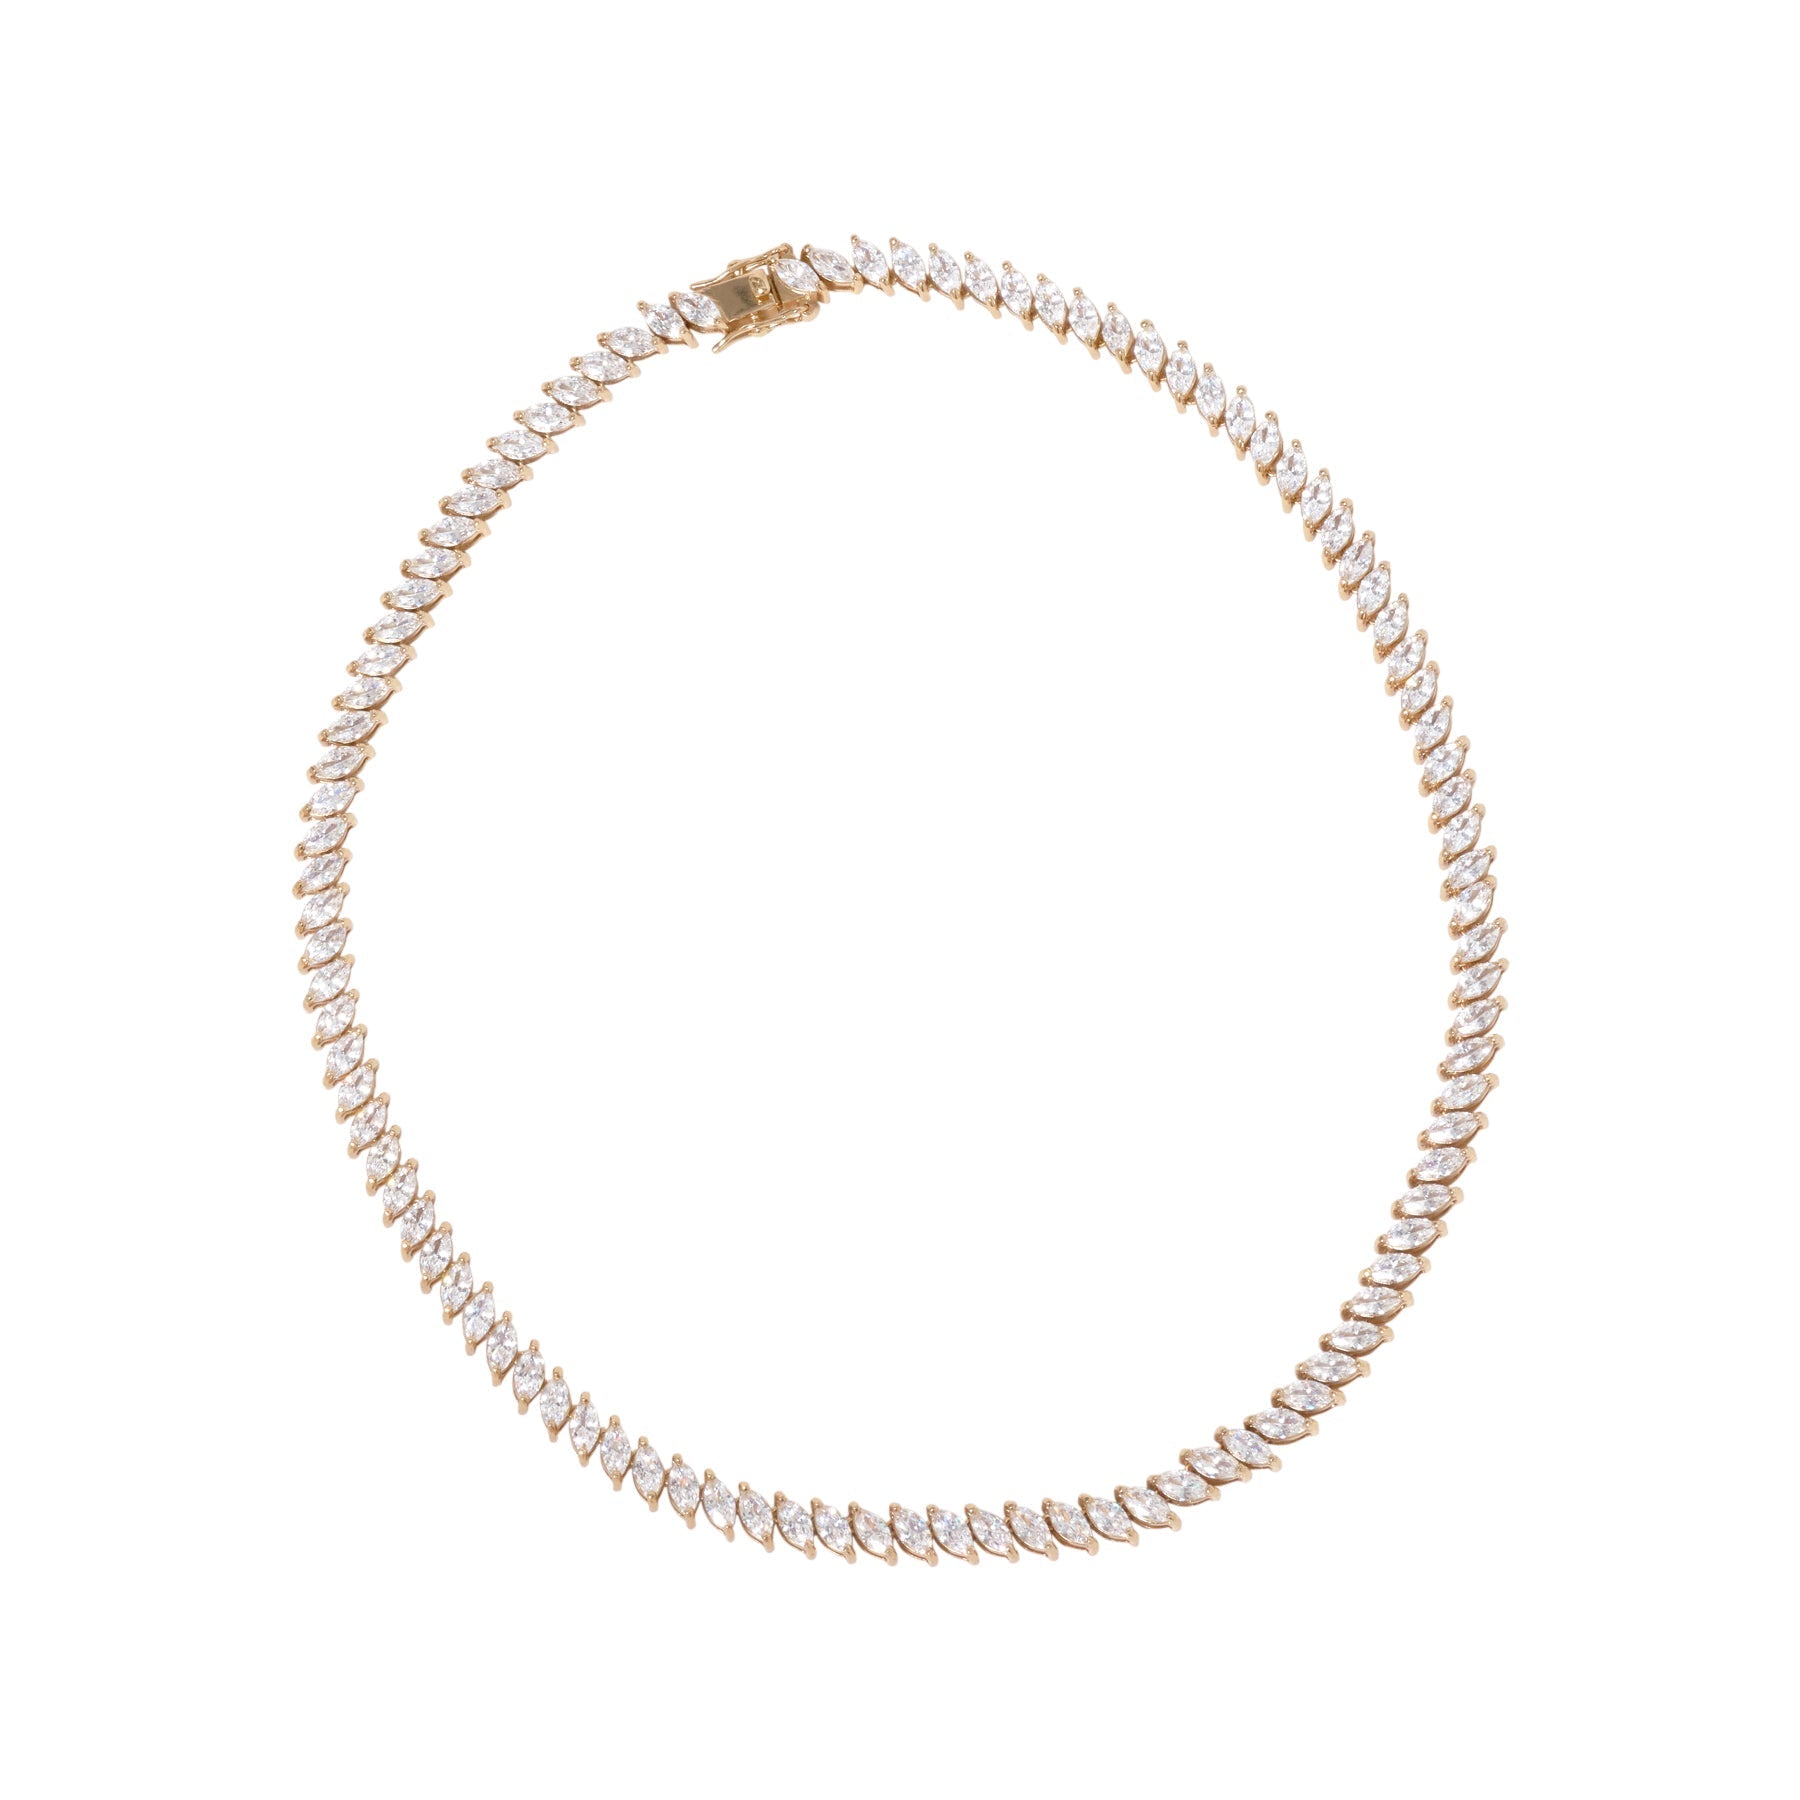 Santi Crystal Necklace Gold Clear by Mignonne Gavigan